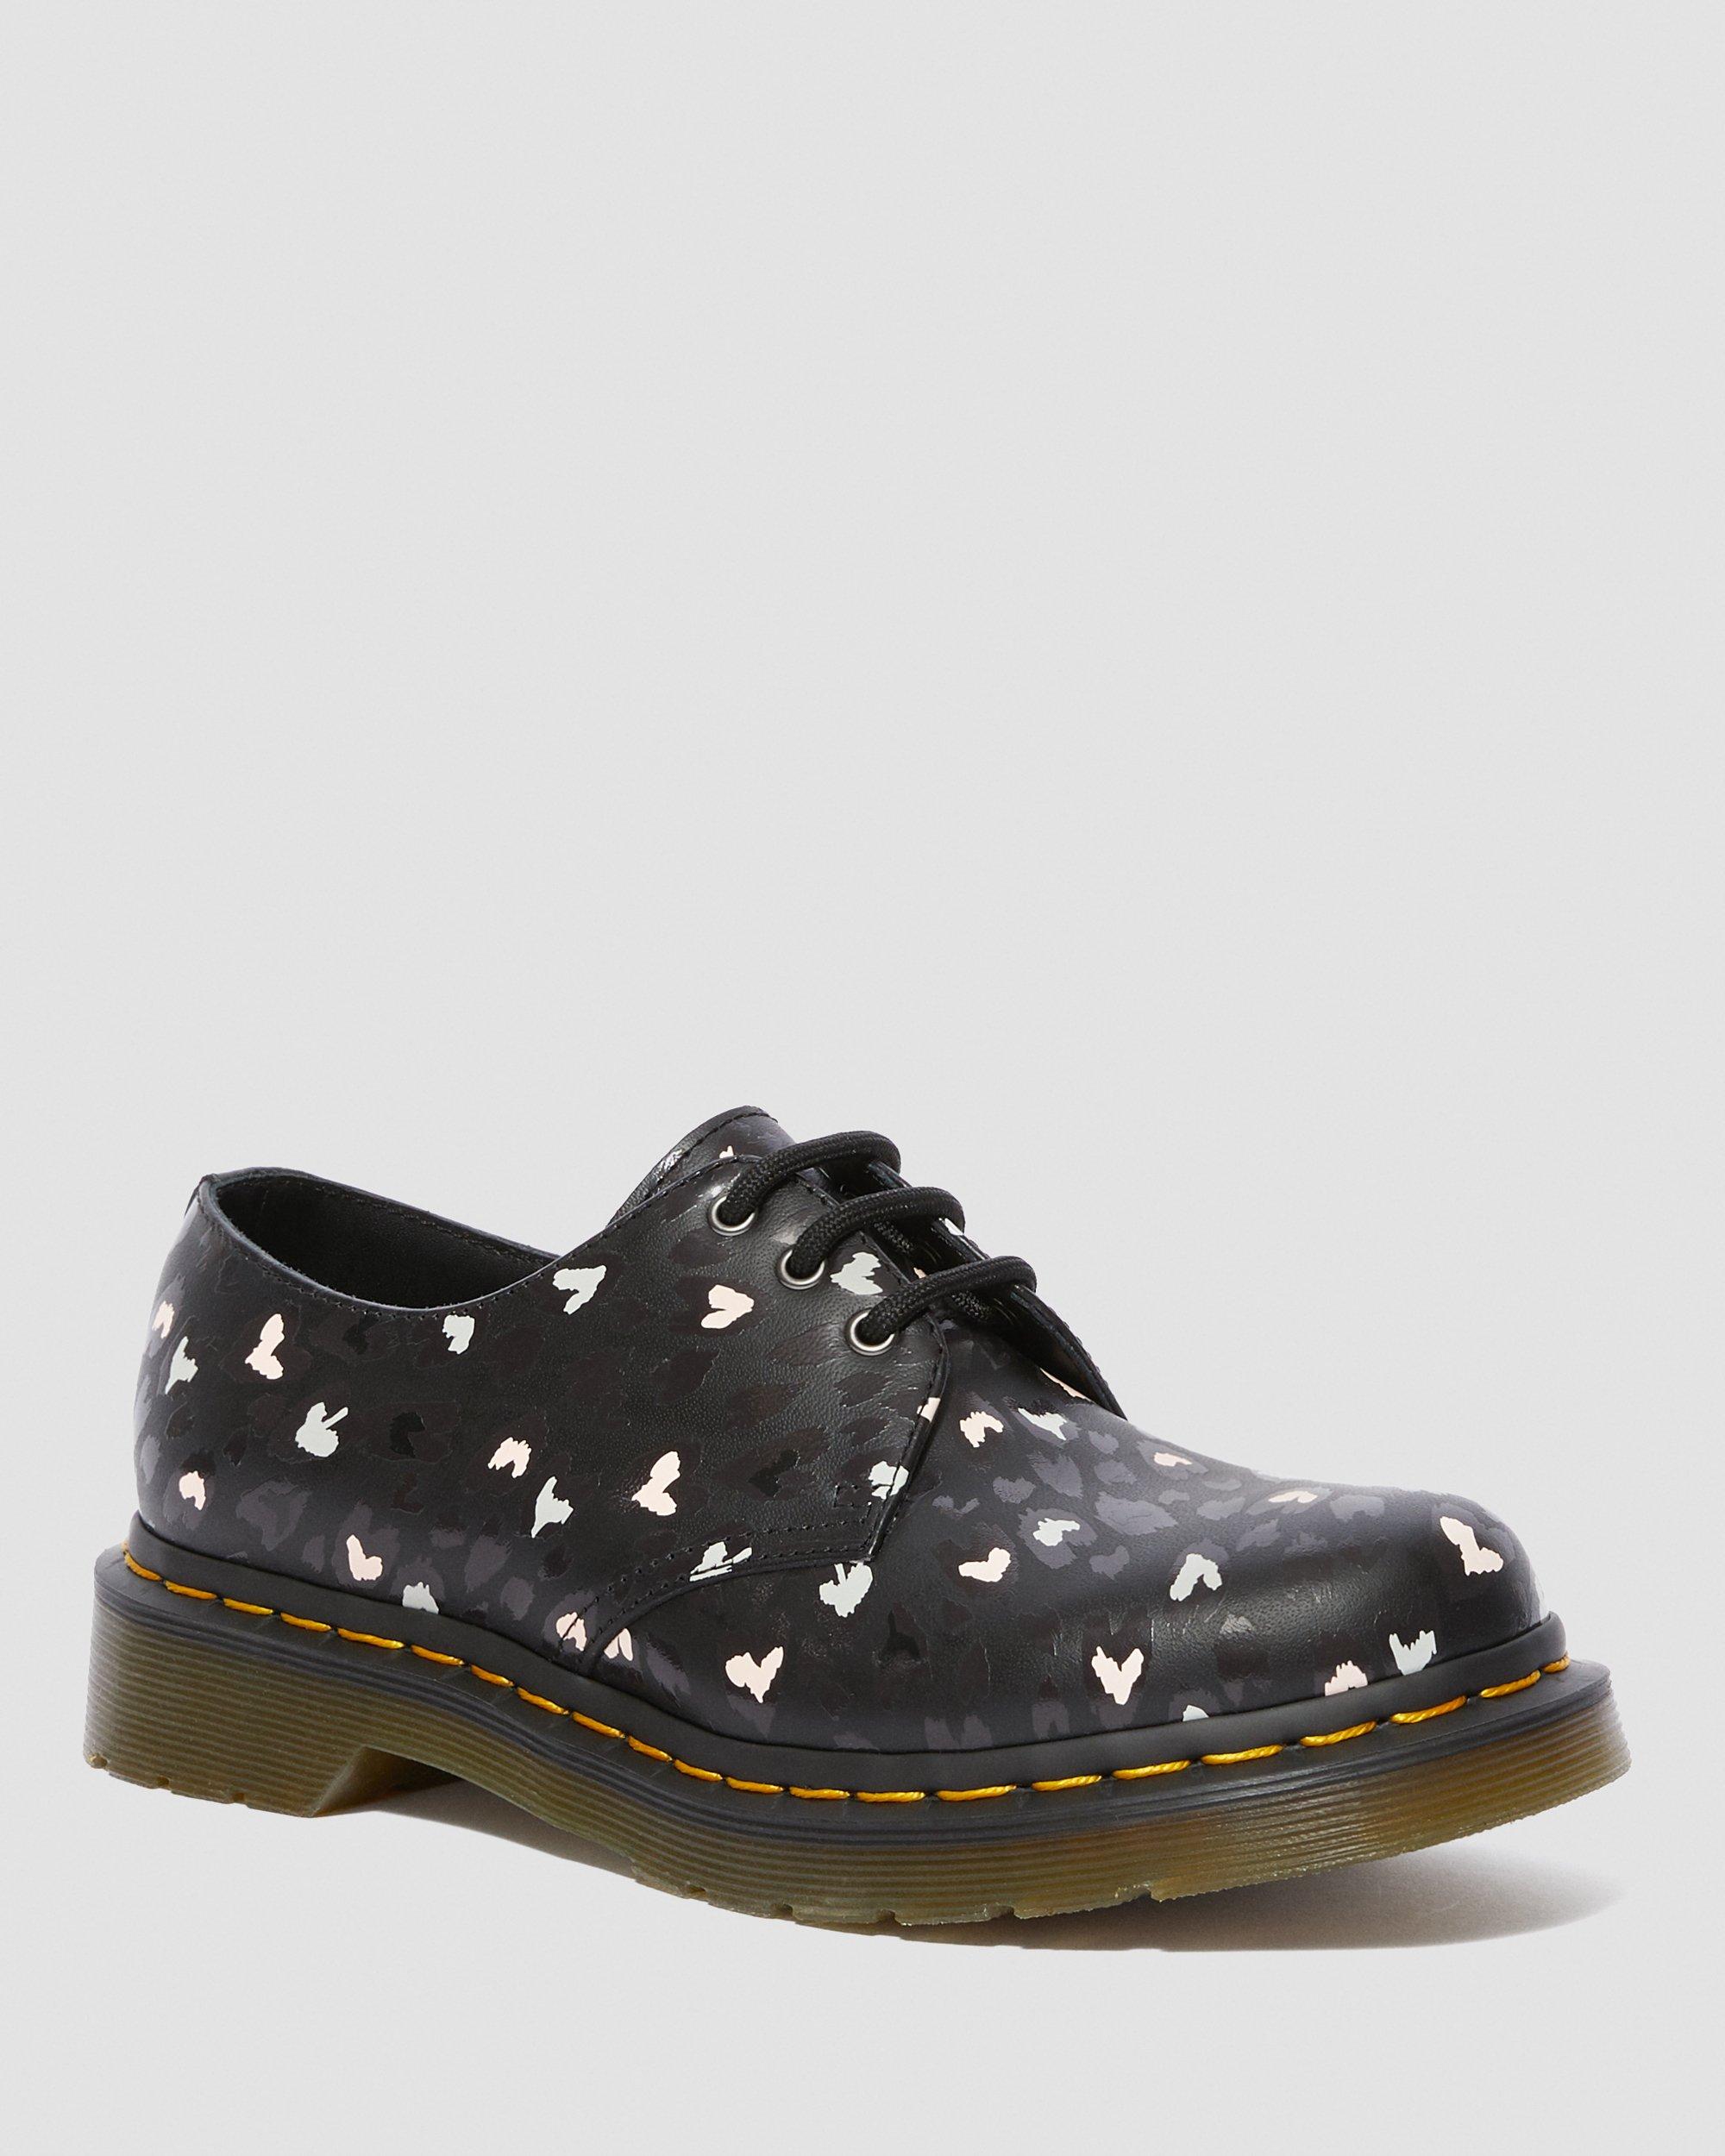 1461 HEARTS LEATHER SHOES | Dr. Martens UK